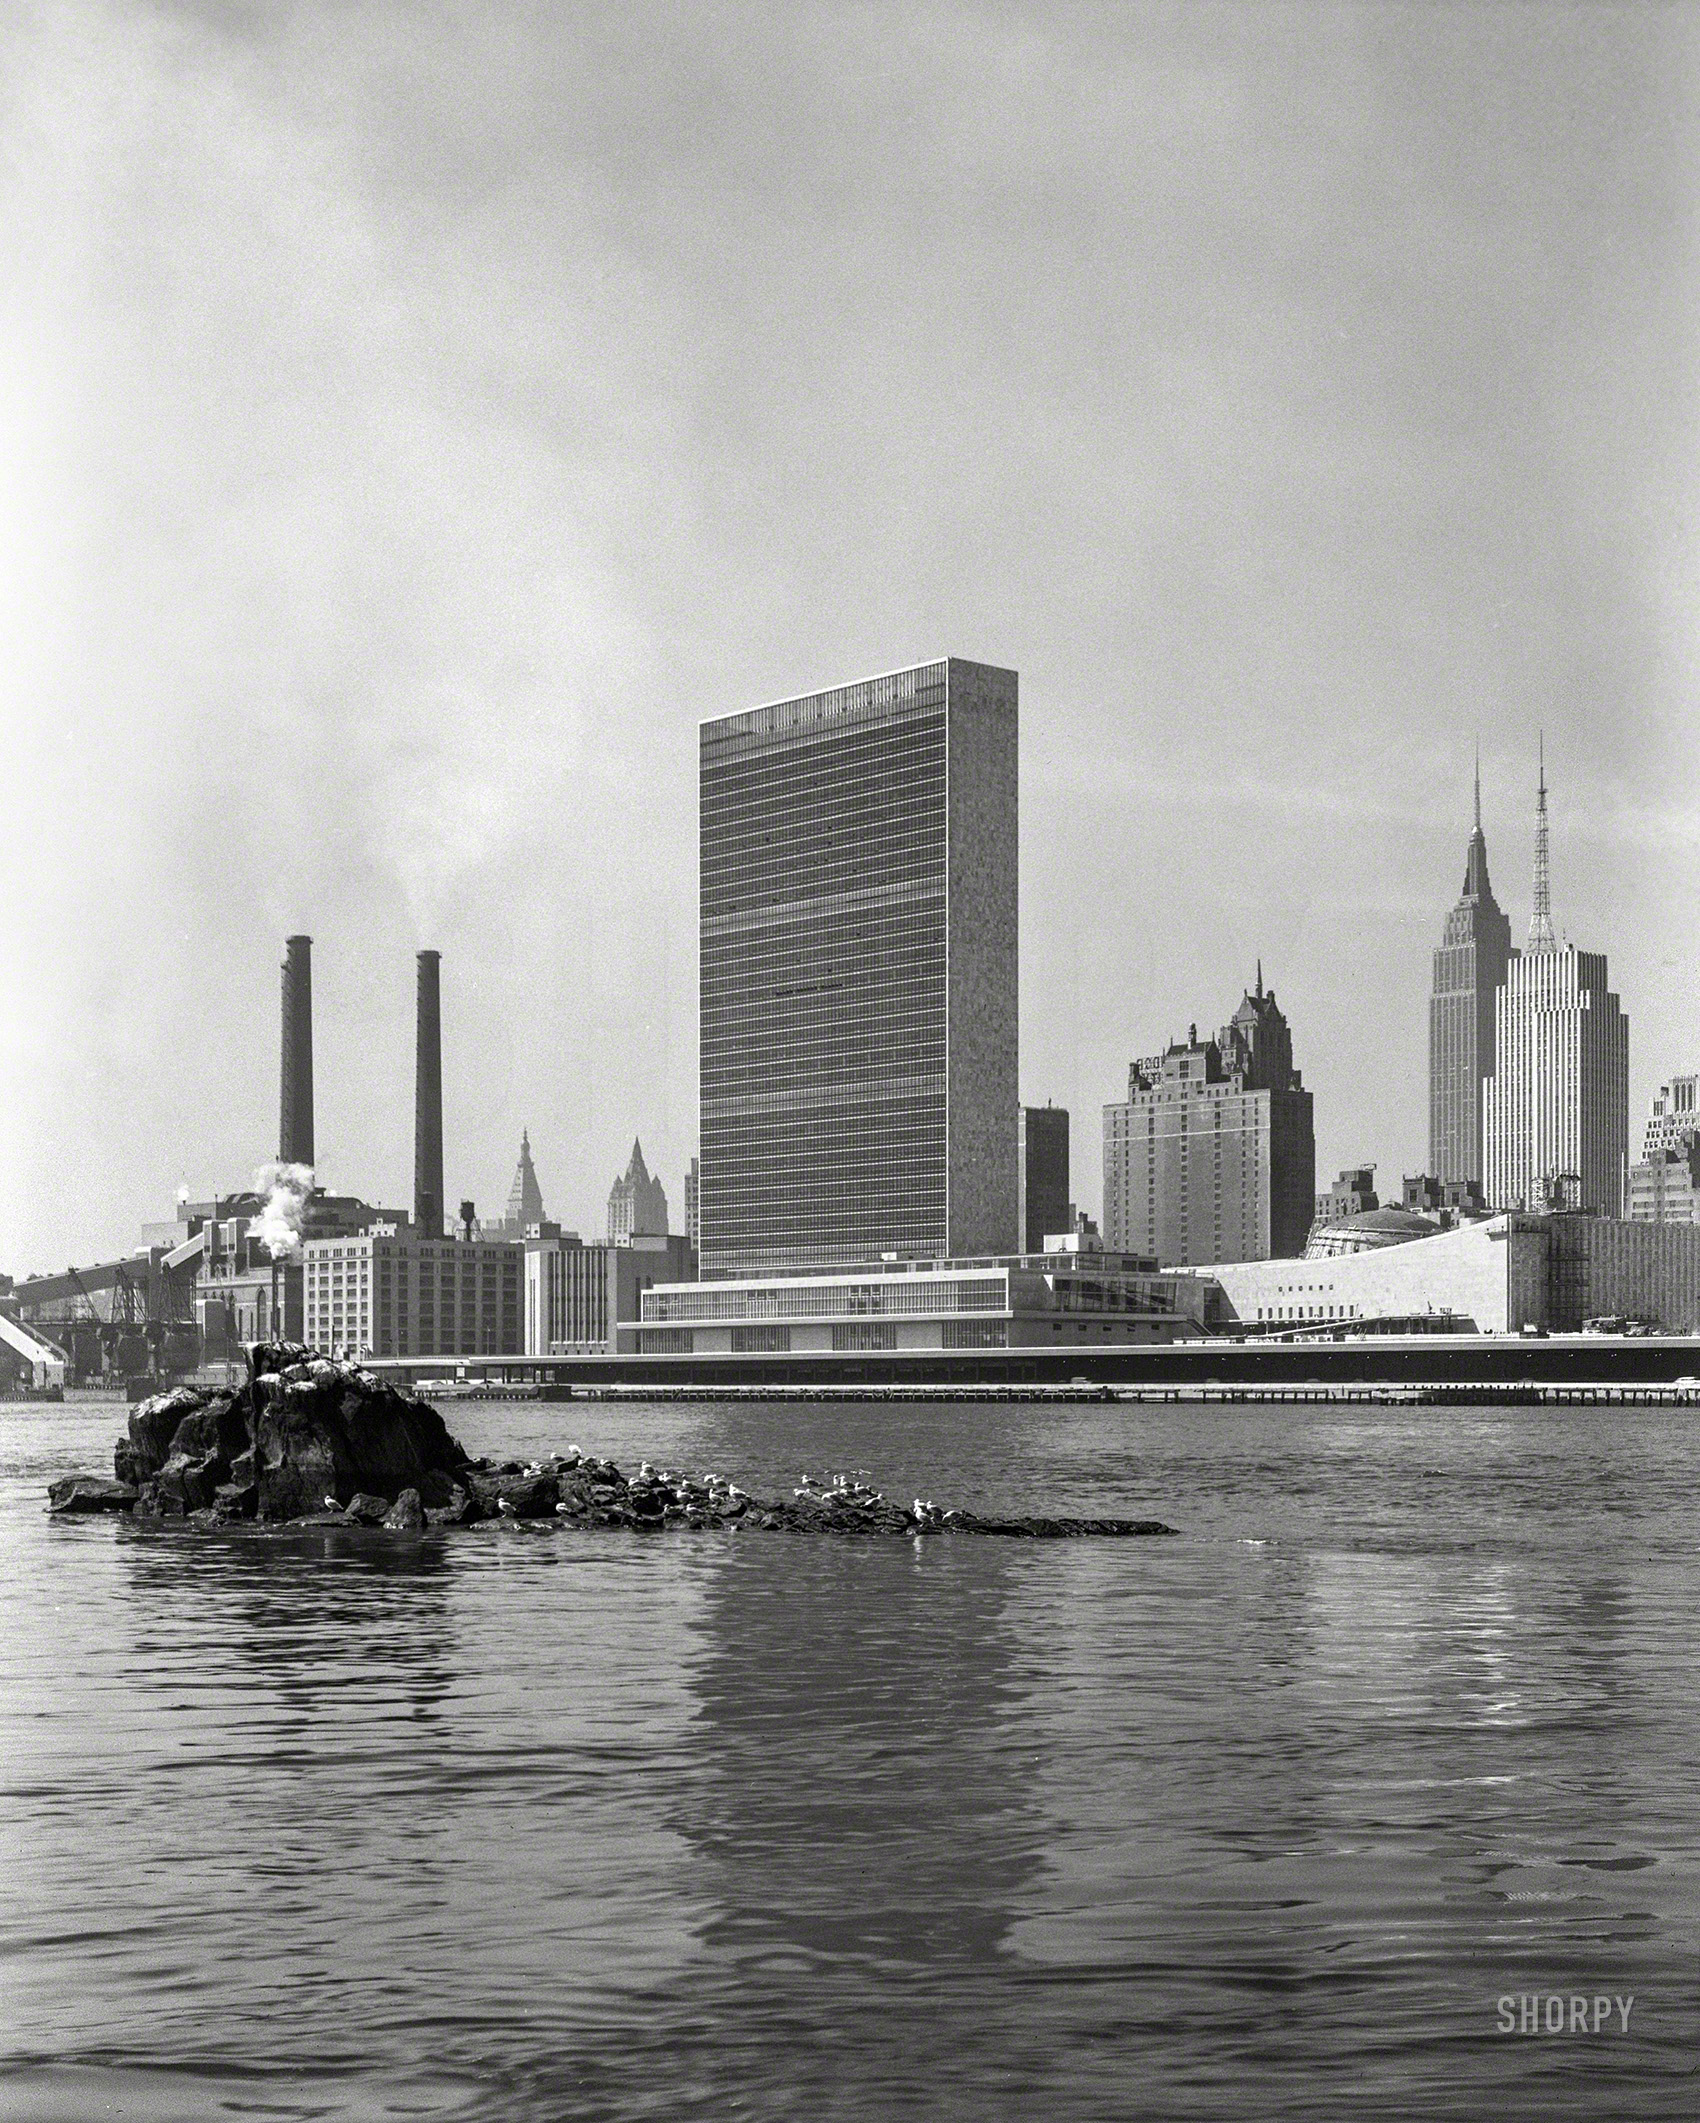 March 18, 1952. "United Nations Secretariat and General Assembly from Welfare Island, East River." 5x7 acetate negative by Gottscho-Schleisner. View full size.